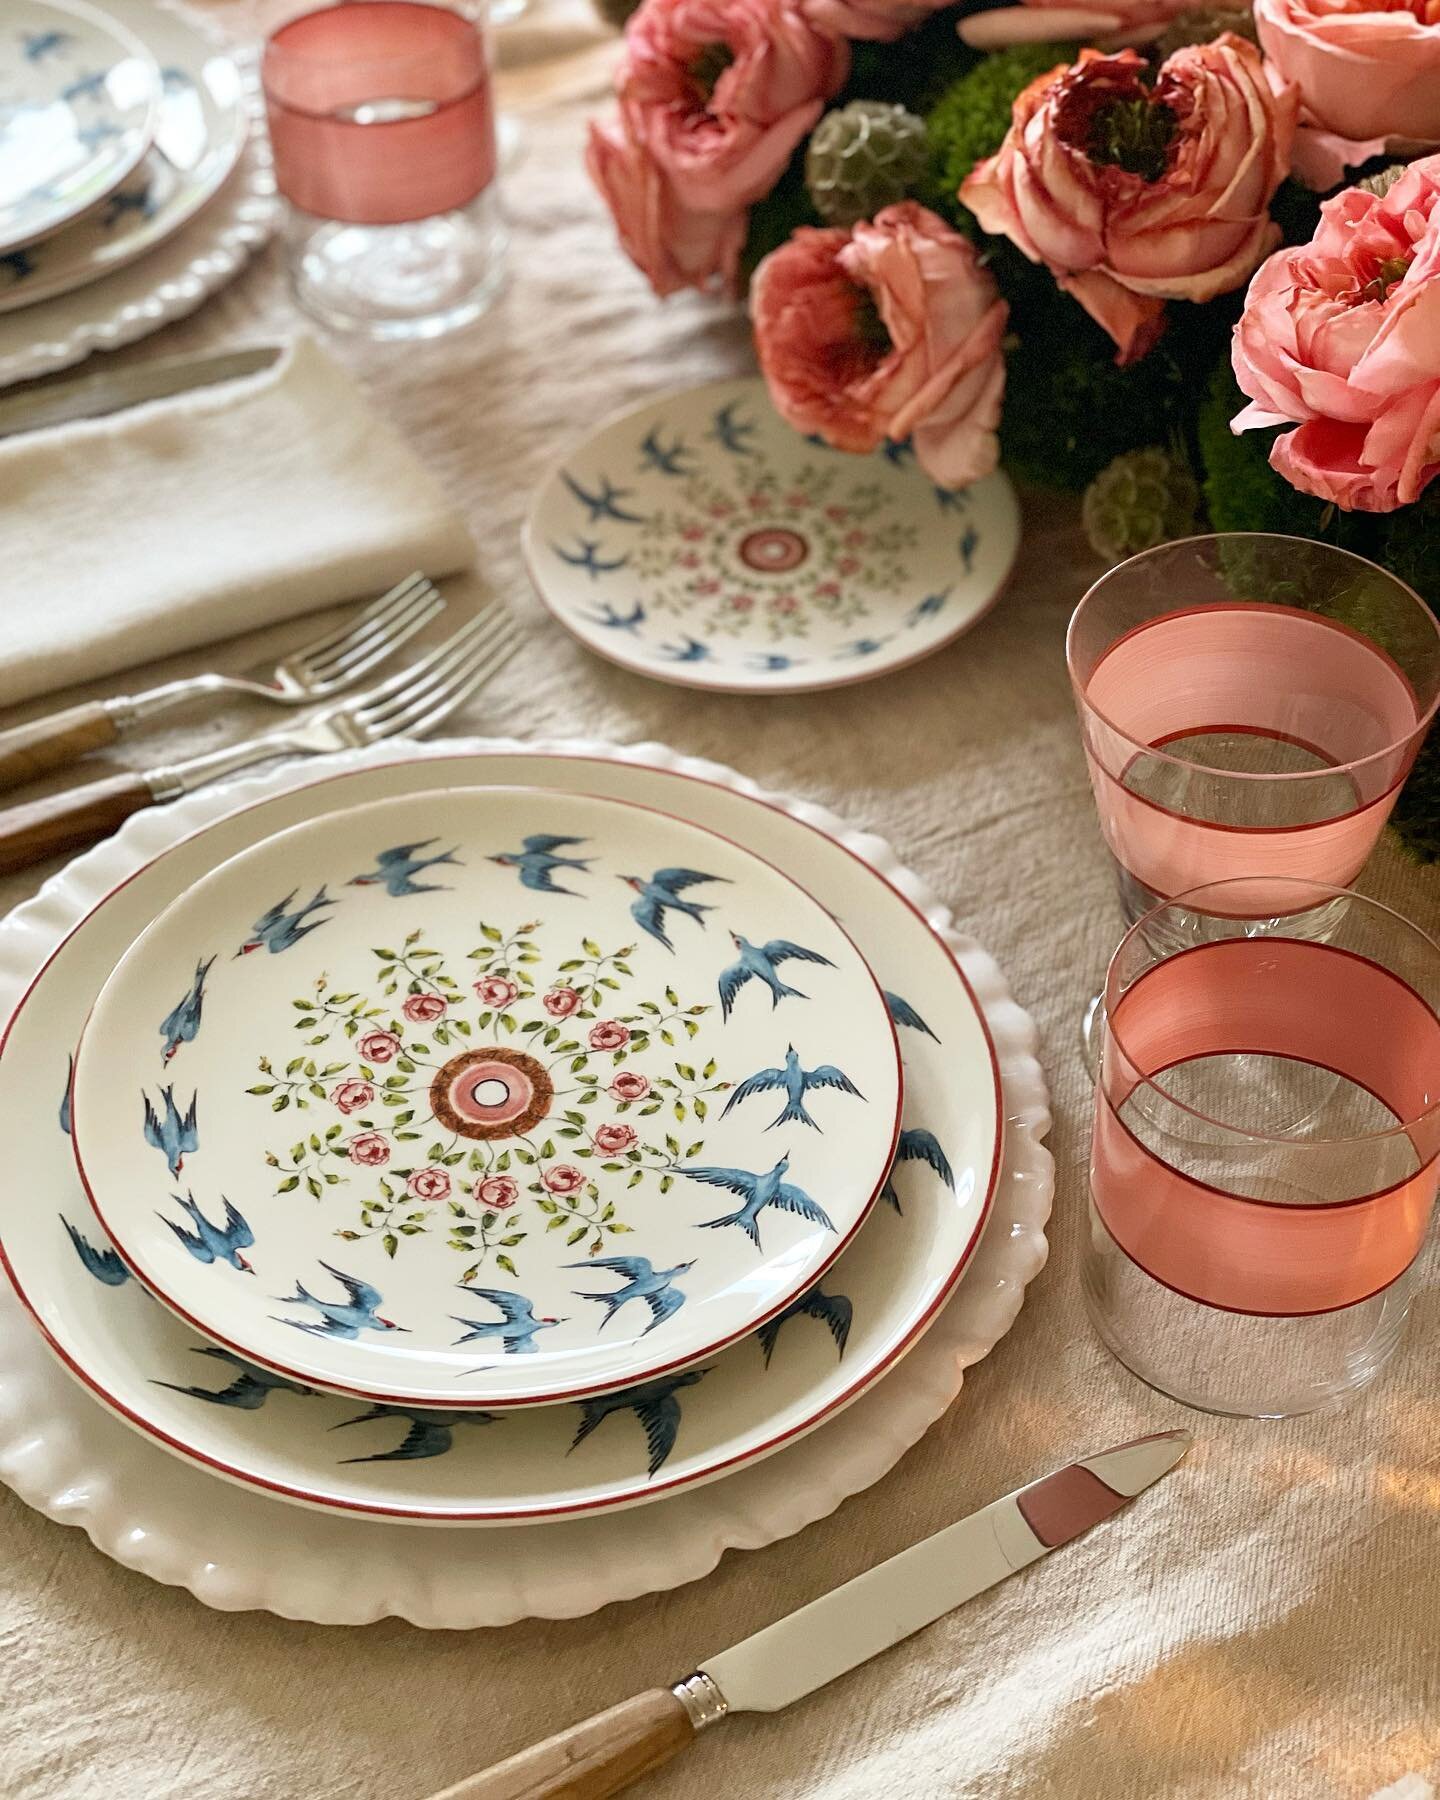 Easter is one of our favorite holidays! This year we drew all of our inspiration from our tabletop from @theark_  including the gorgeous centerpieces by @gravel_la with lush pink garden roses that tied in beautifully with the pink roses in the plates